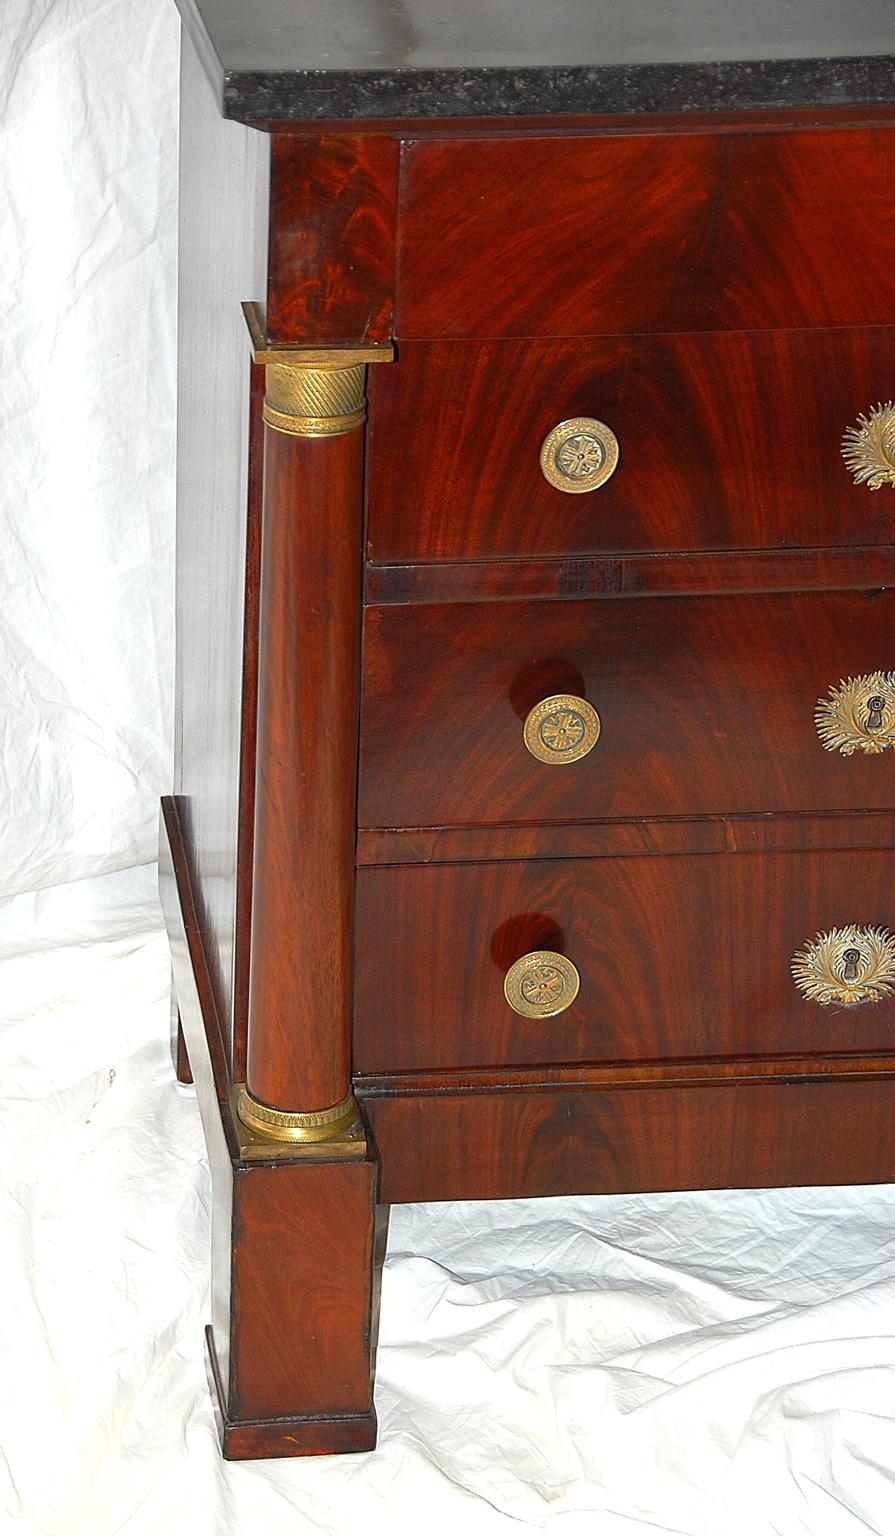 French Second Empire period mahogany chest of drawers with original removable black marble top. The flame grain mahogany is beautifully matched through the drawers. This small 32 inch chest has free standing carved columns with ormolu mounts and